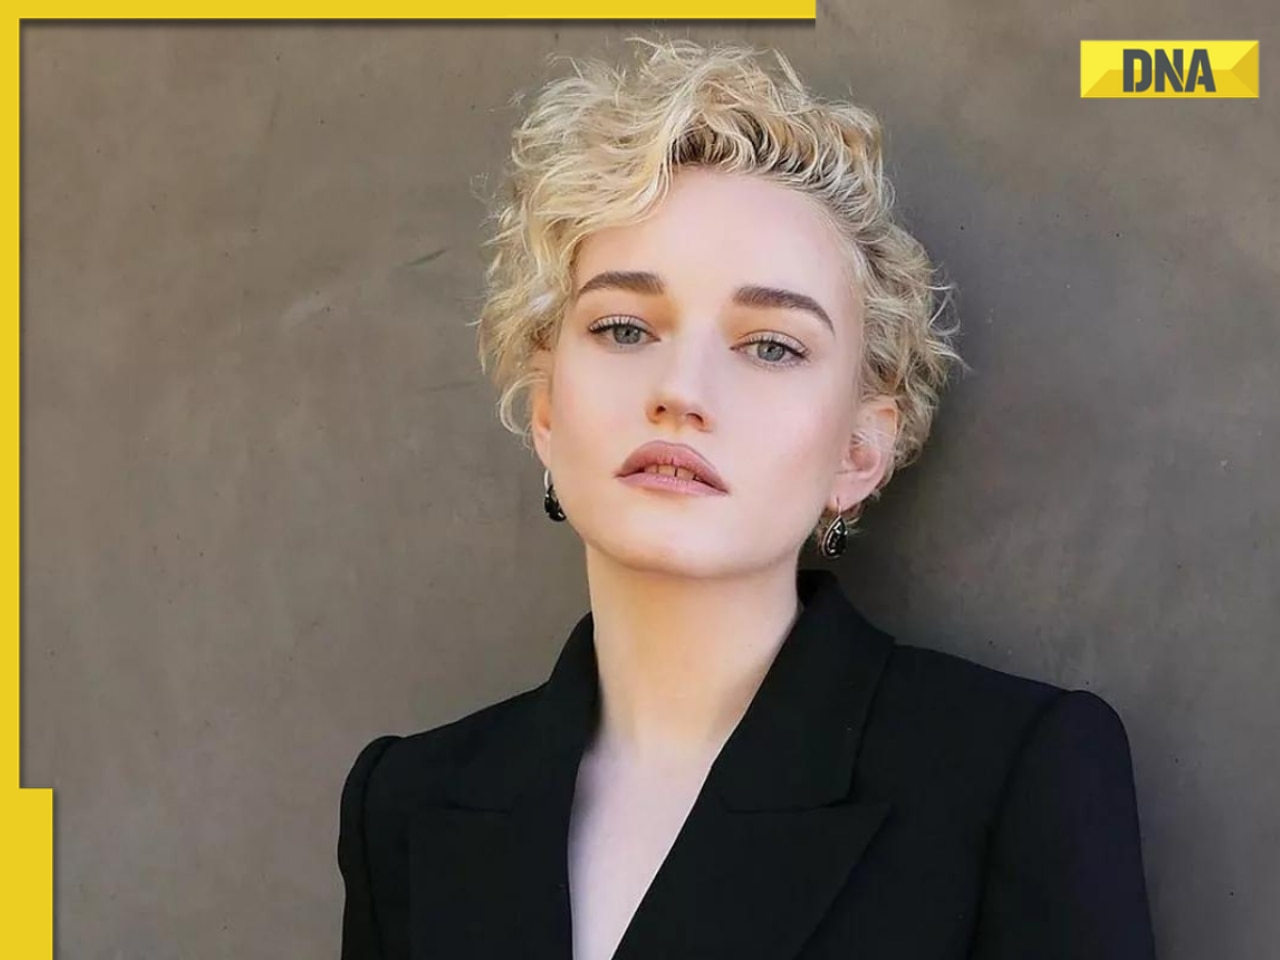 Julia Garner's casting as Silver Surfer in Marvel's The Fantastic Four leads to online rants: 'Killed by wokeness'